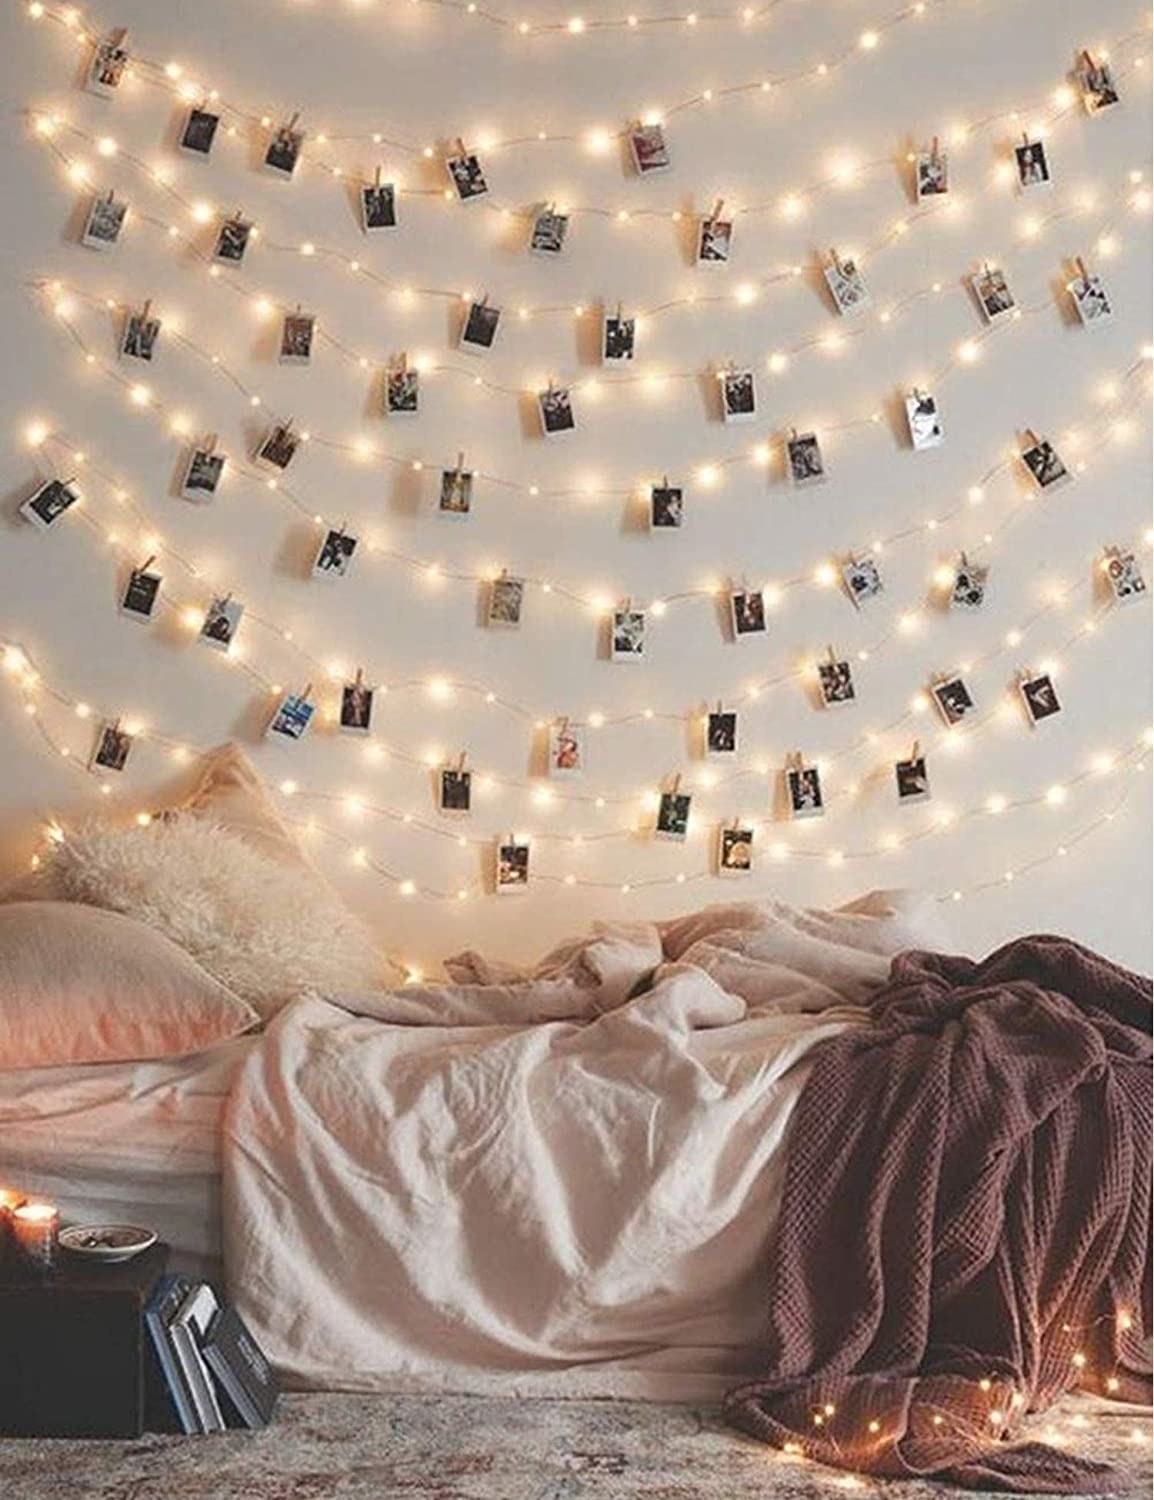 product photo of the string lights hanging on a wall with photos hanging from it